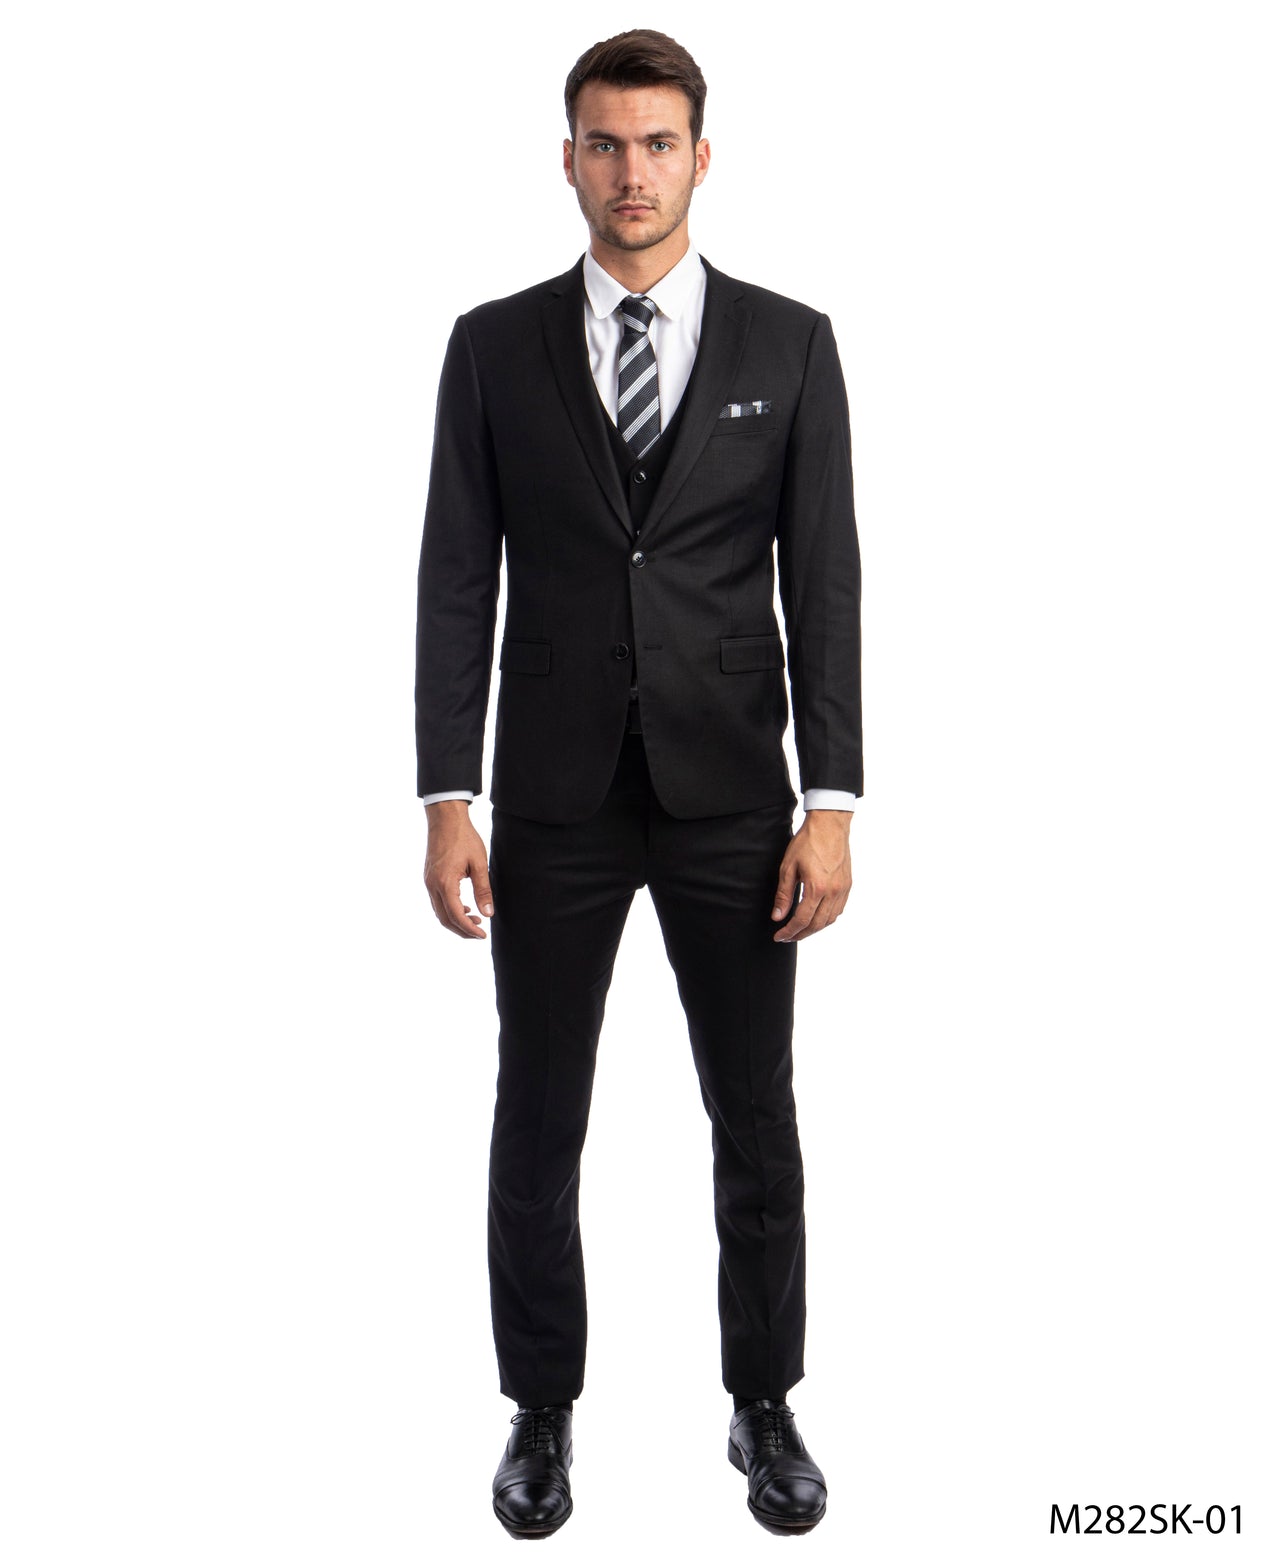 Black Suit For Men Formal Suits For All Ocassions - Hattitude